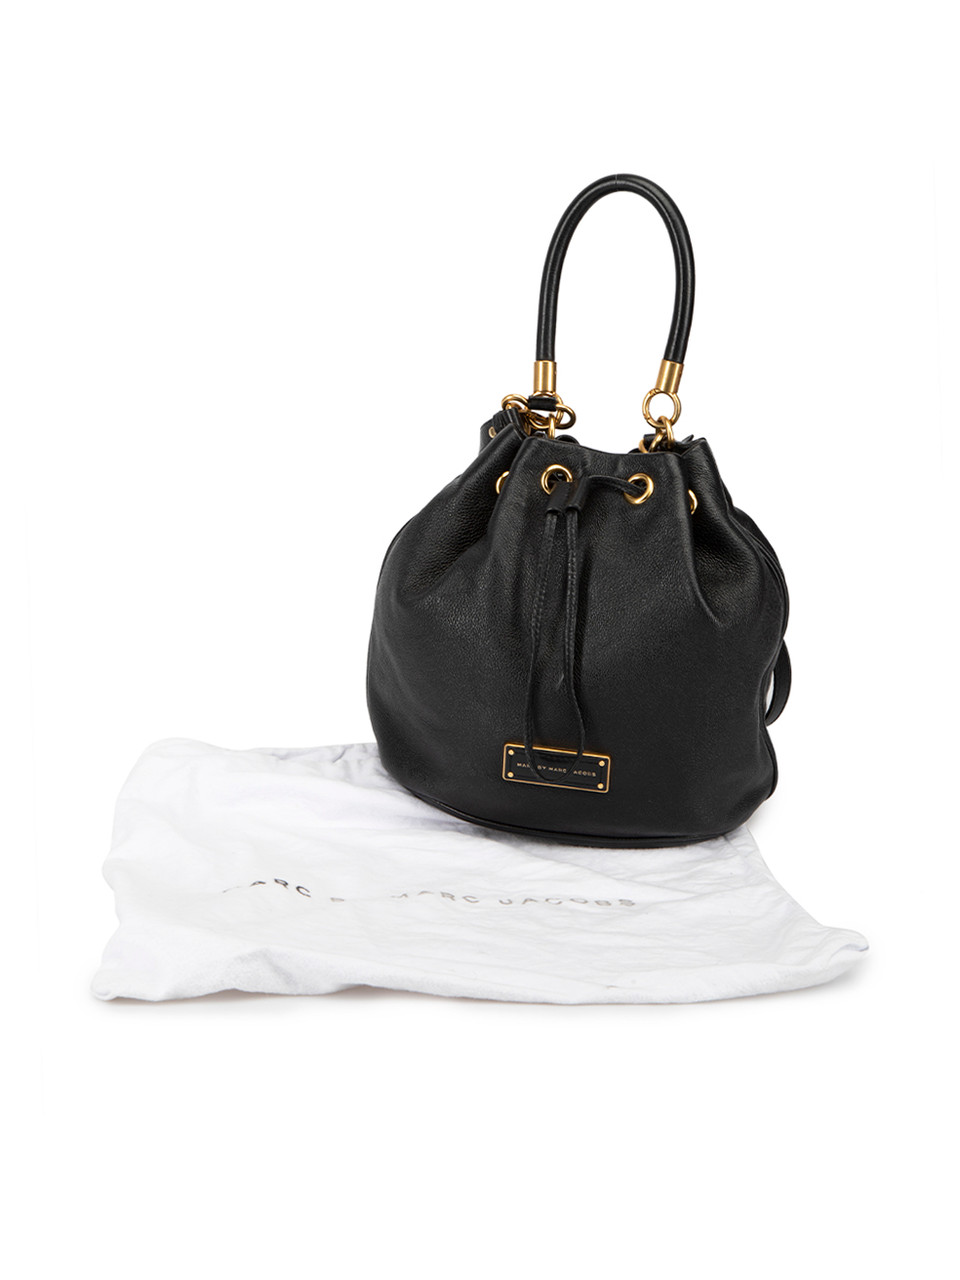 Marc Jacobs Marc by Marc Jacobs Black Leather Bucket Bag